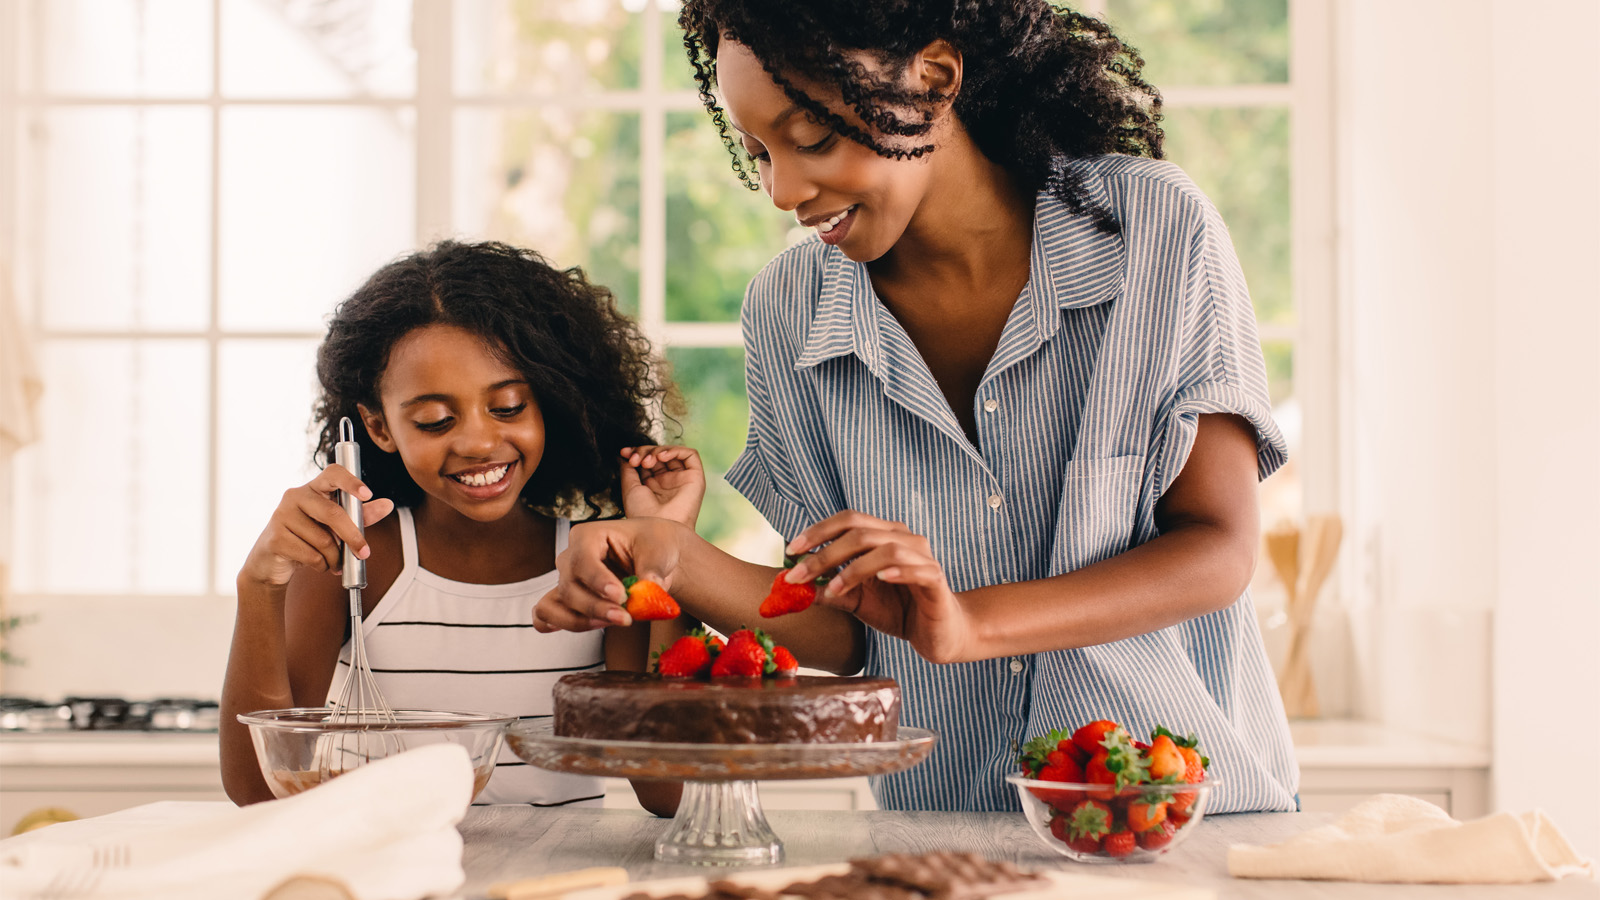 A woman of color decorating a chocolate cake with strawberries with her daughter